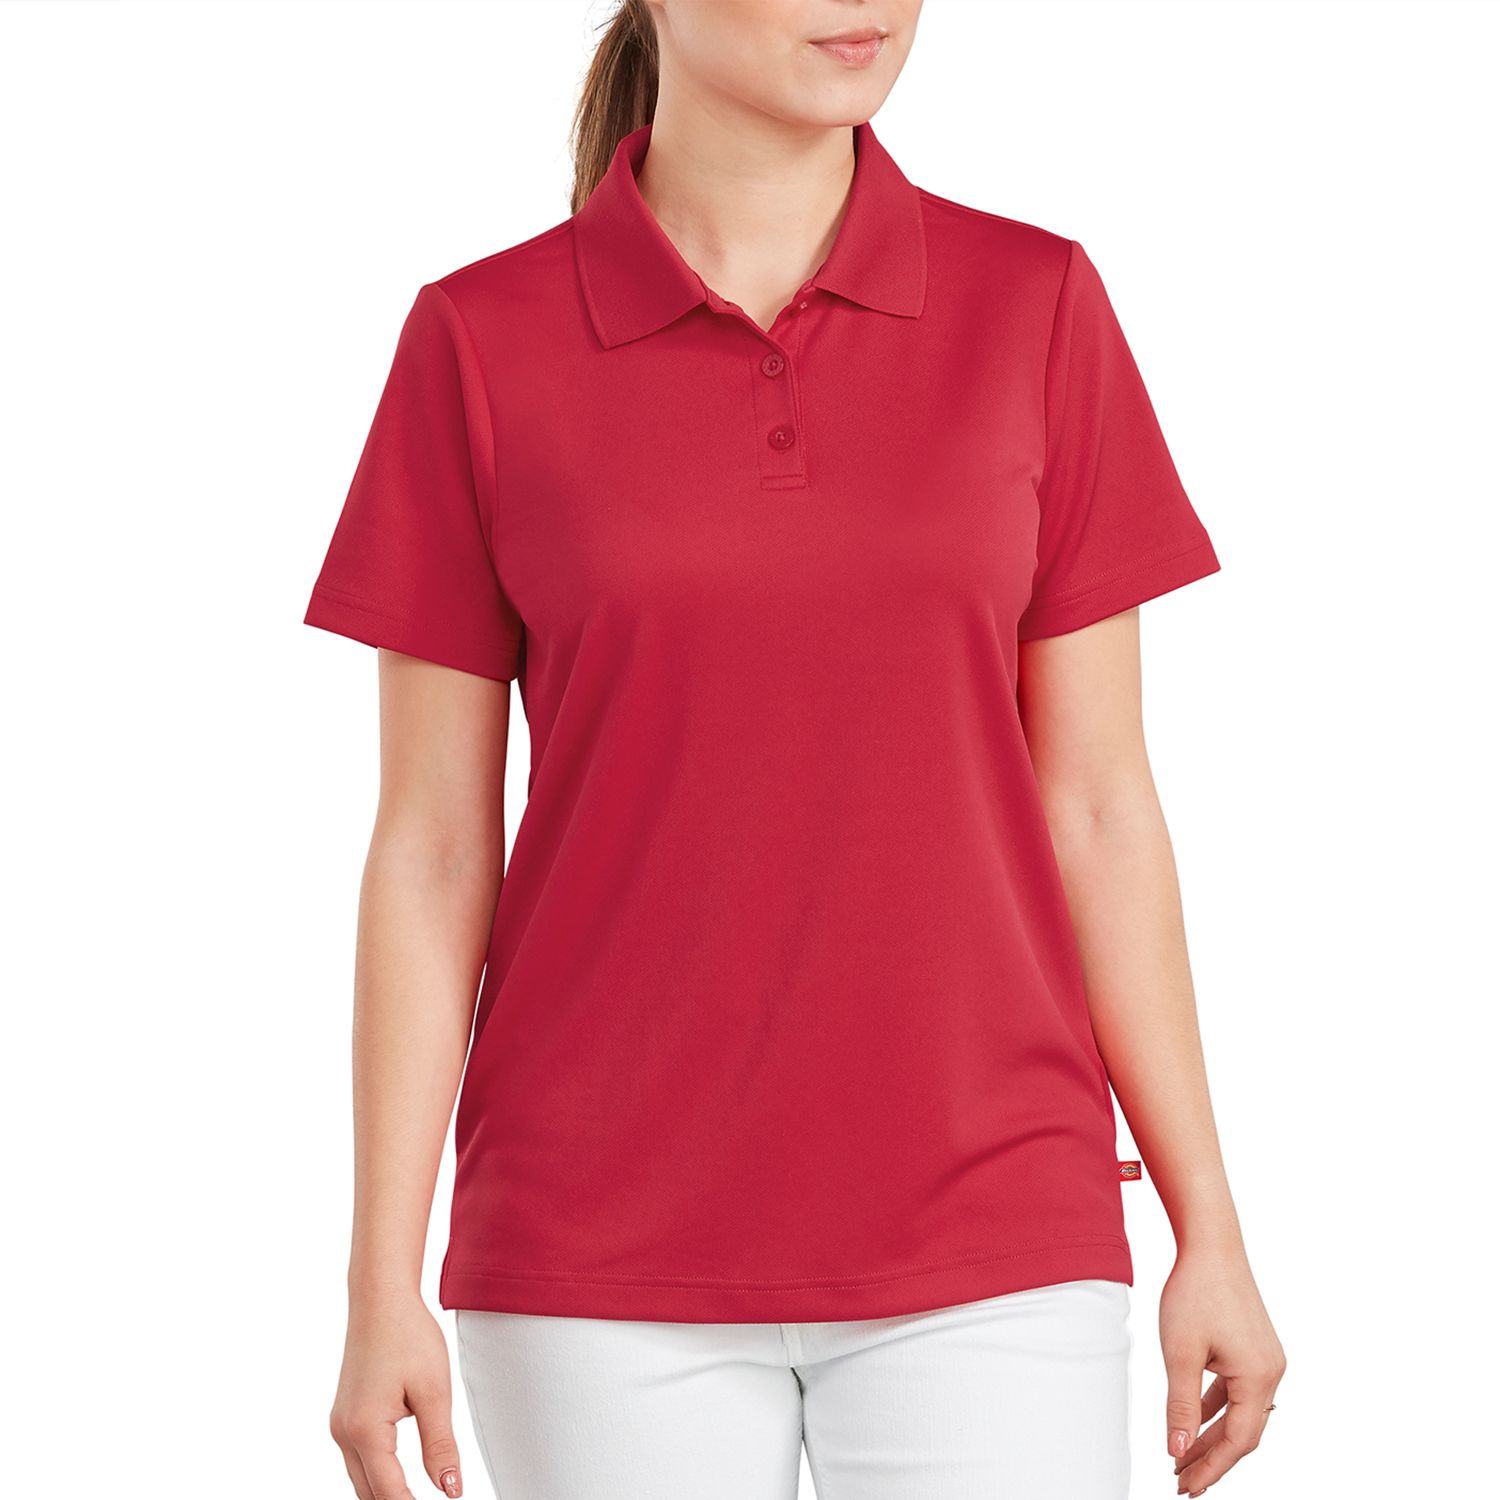 Womens Red Polo Shirts \u0026 Blouses - Tops 